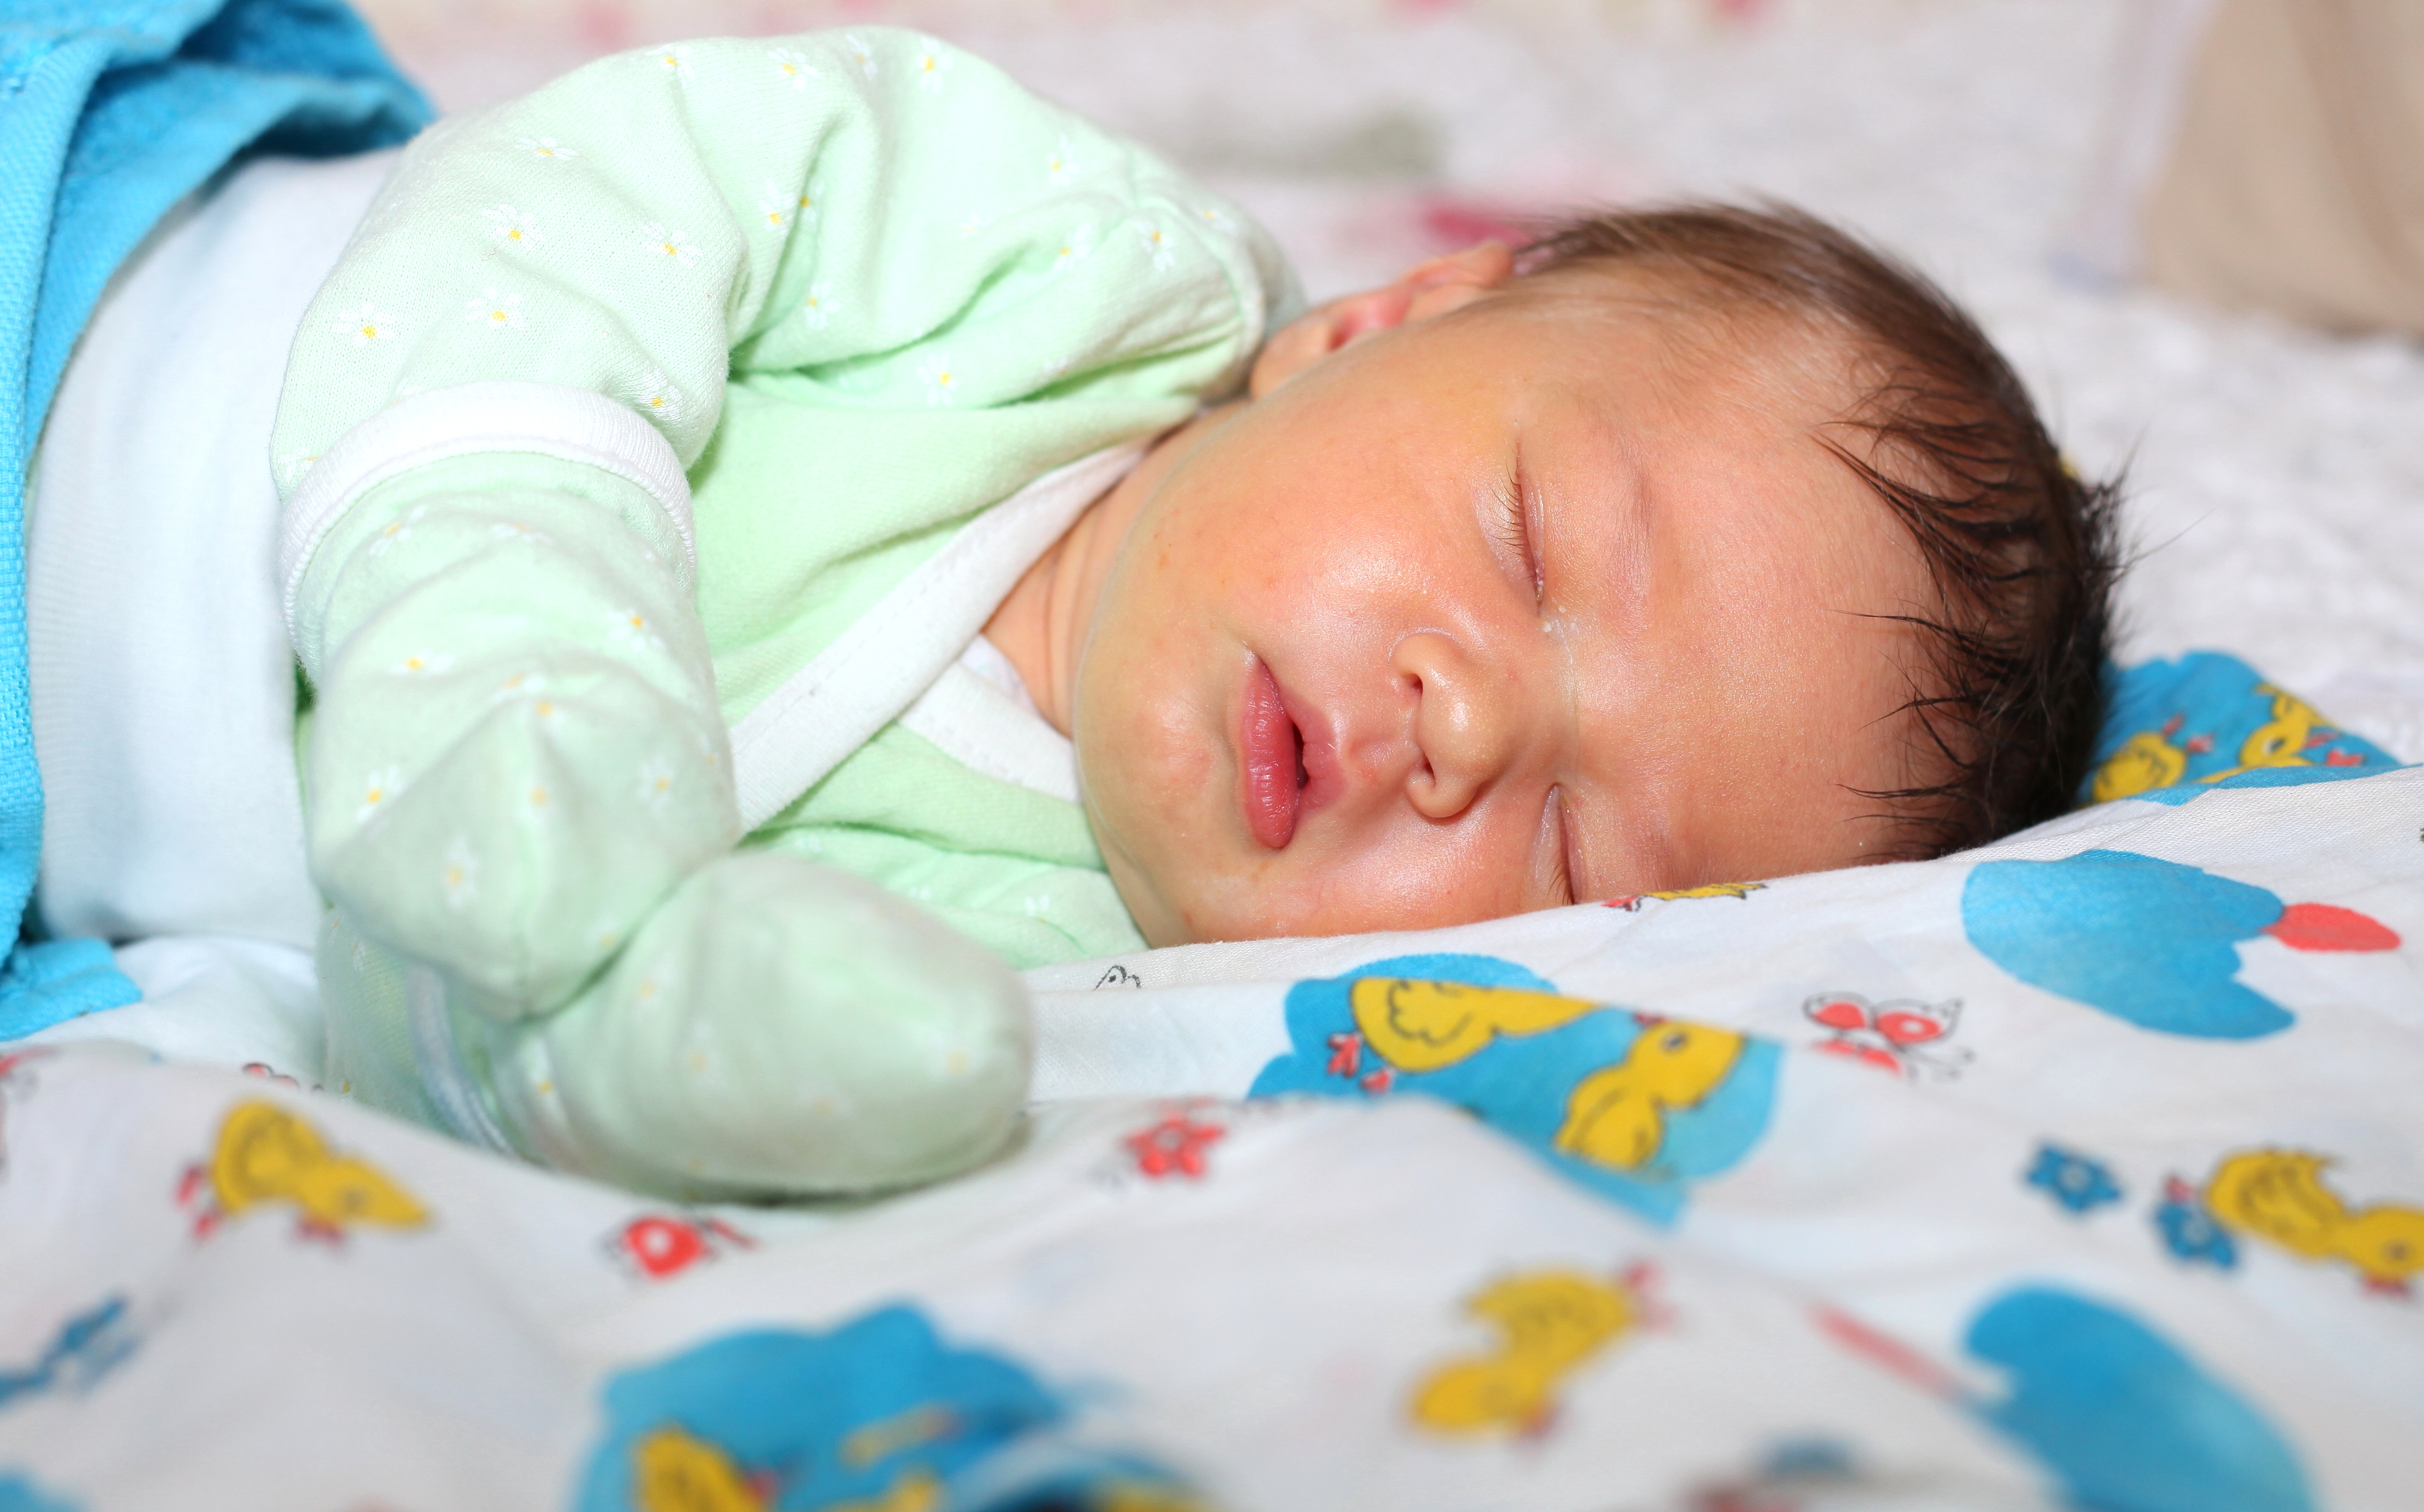 a 6-day old baby boy sleeping, picture 1 out of 2